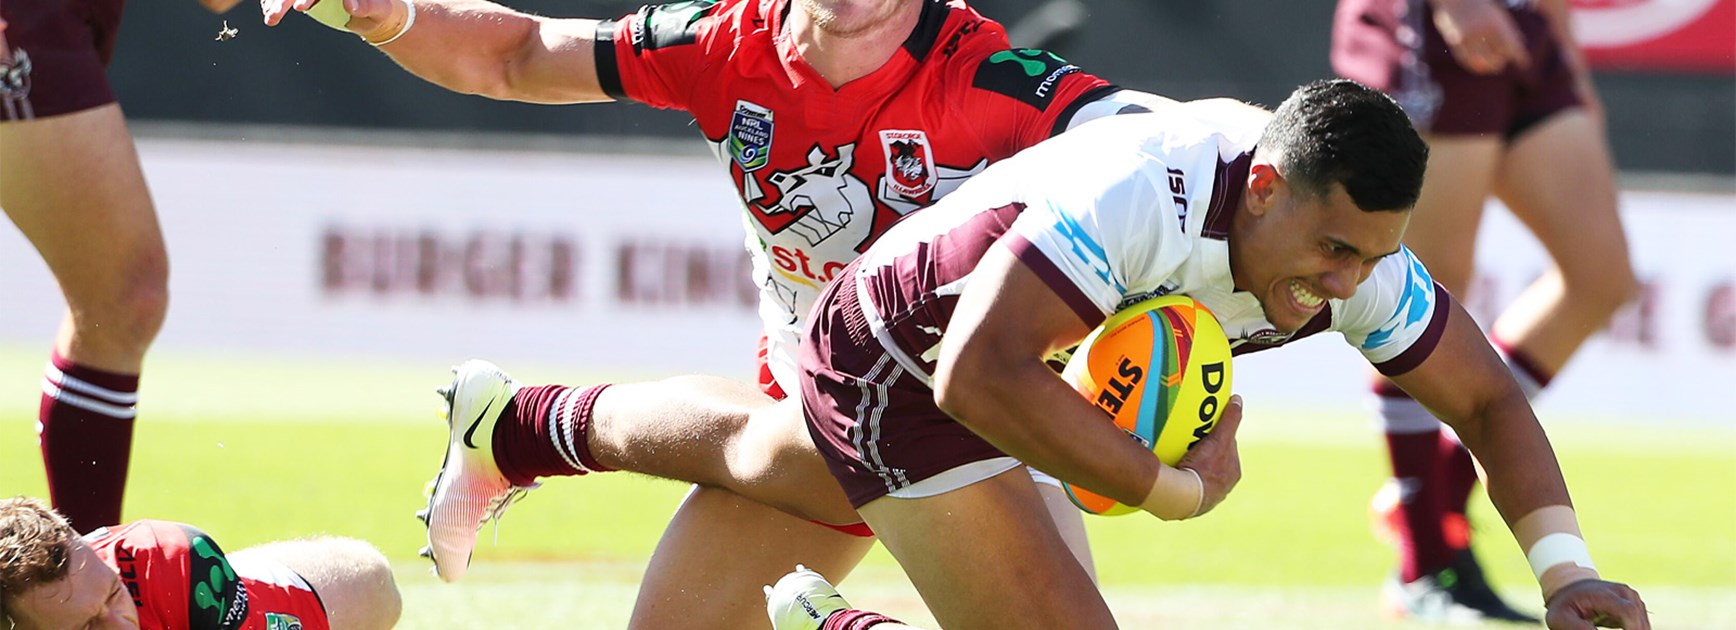 The Sea Eagles edged the Dragons 23-20 in their second match at the Auckland Nines.